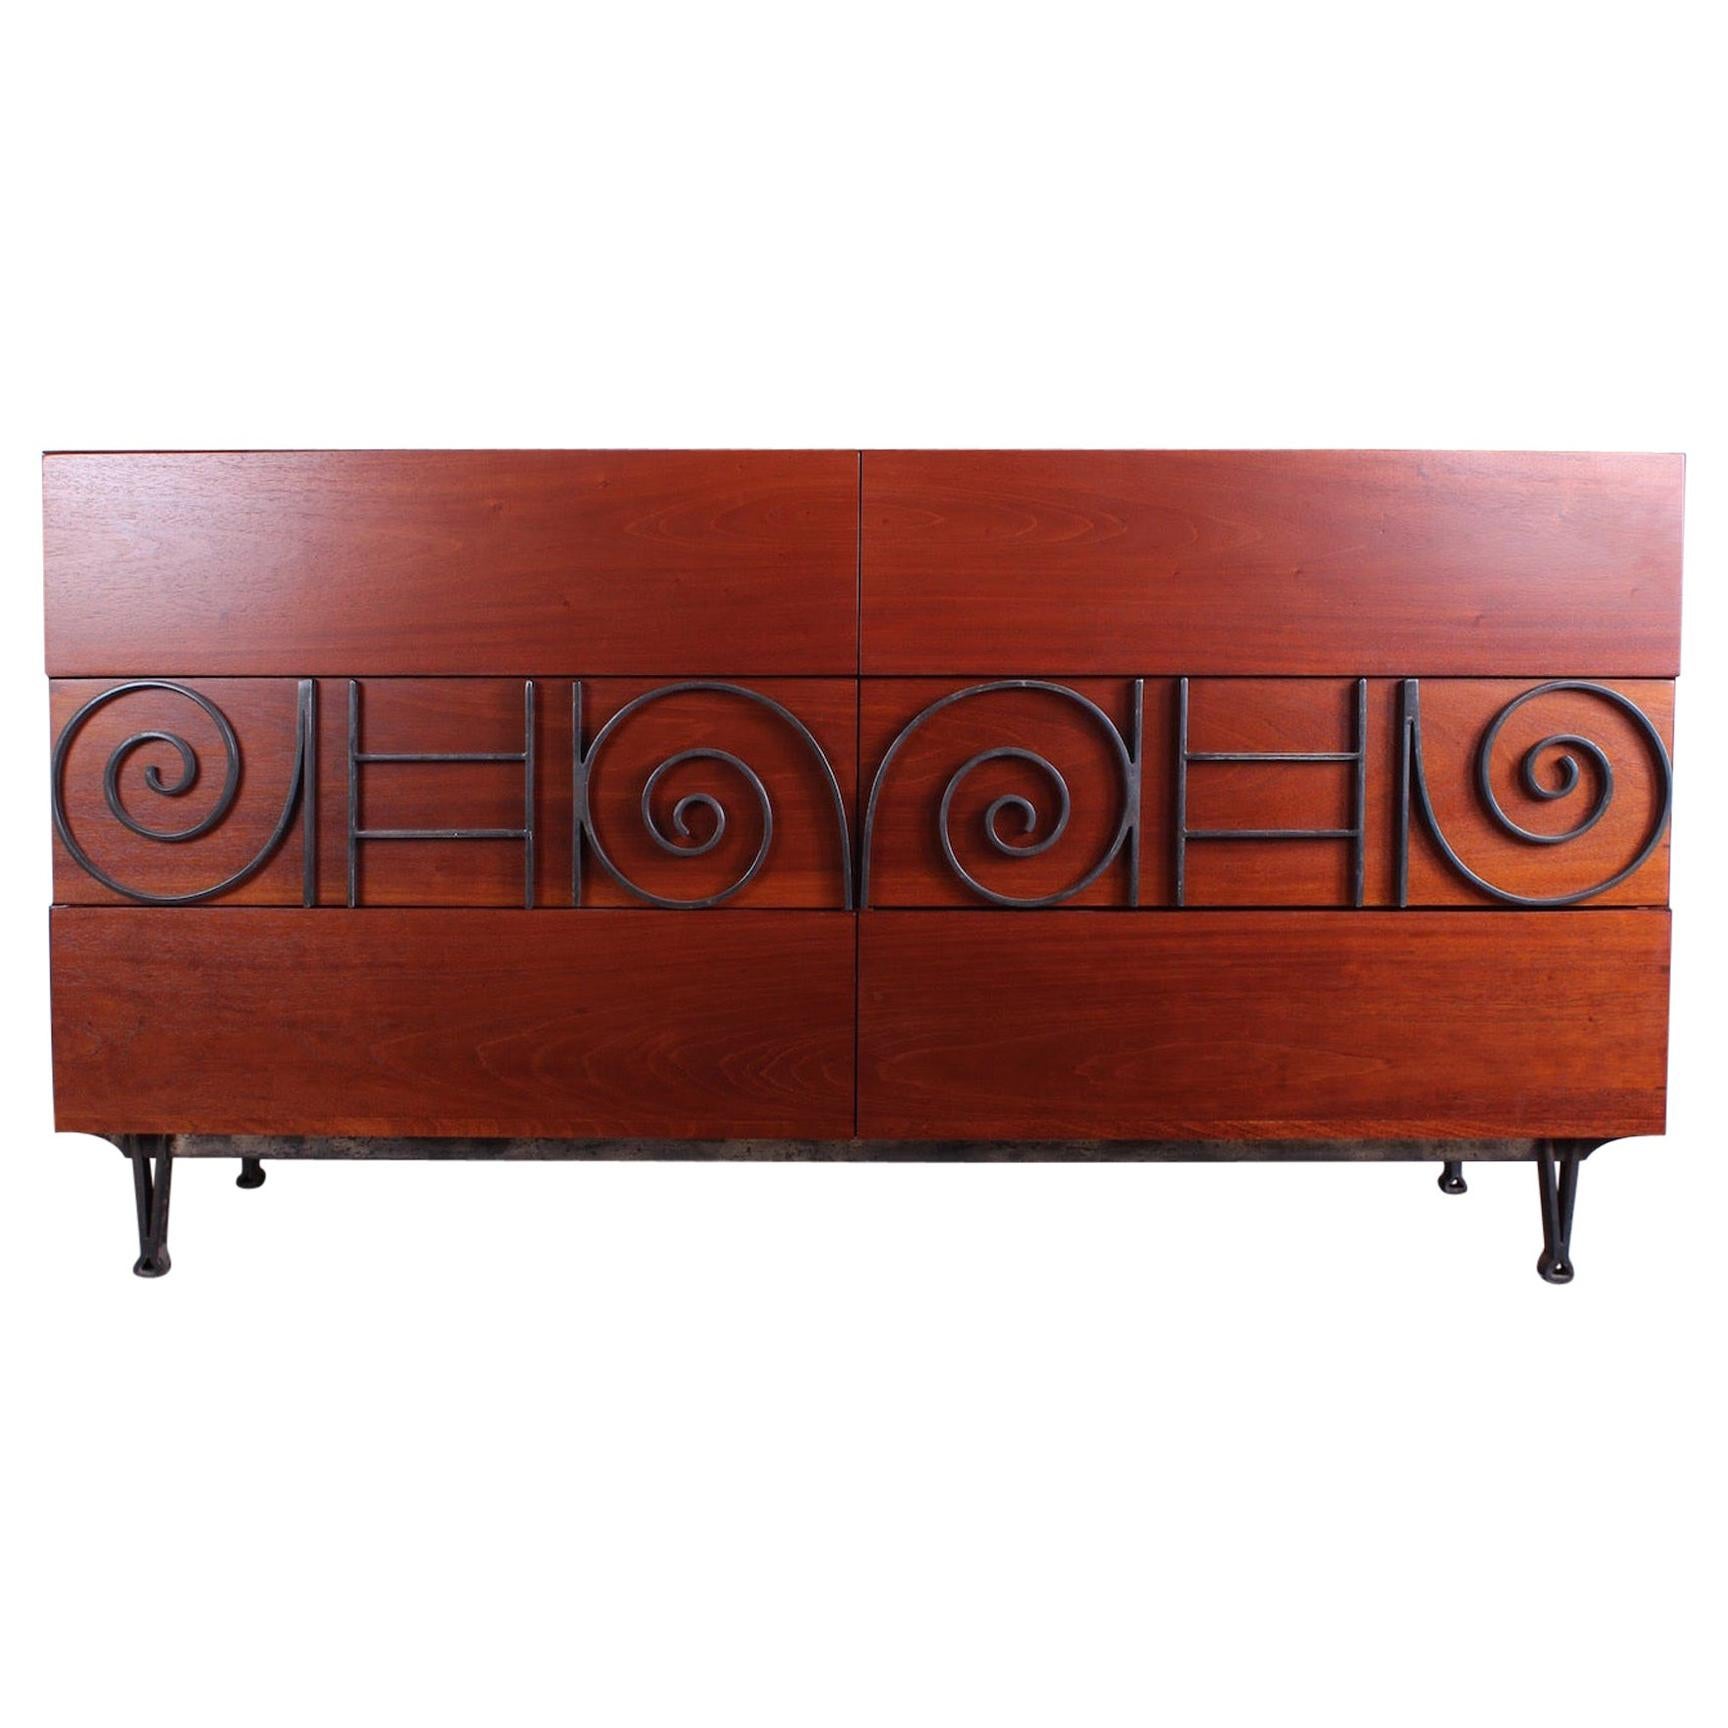 Edmond Spence Chest of Drawers